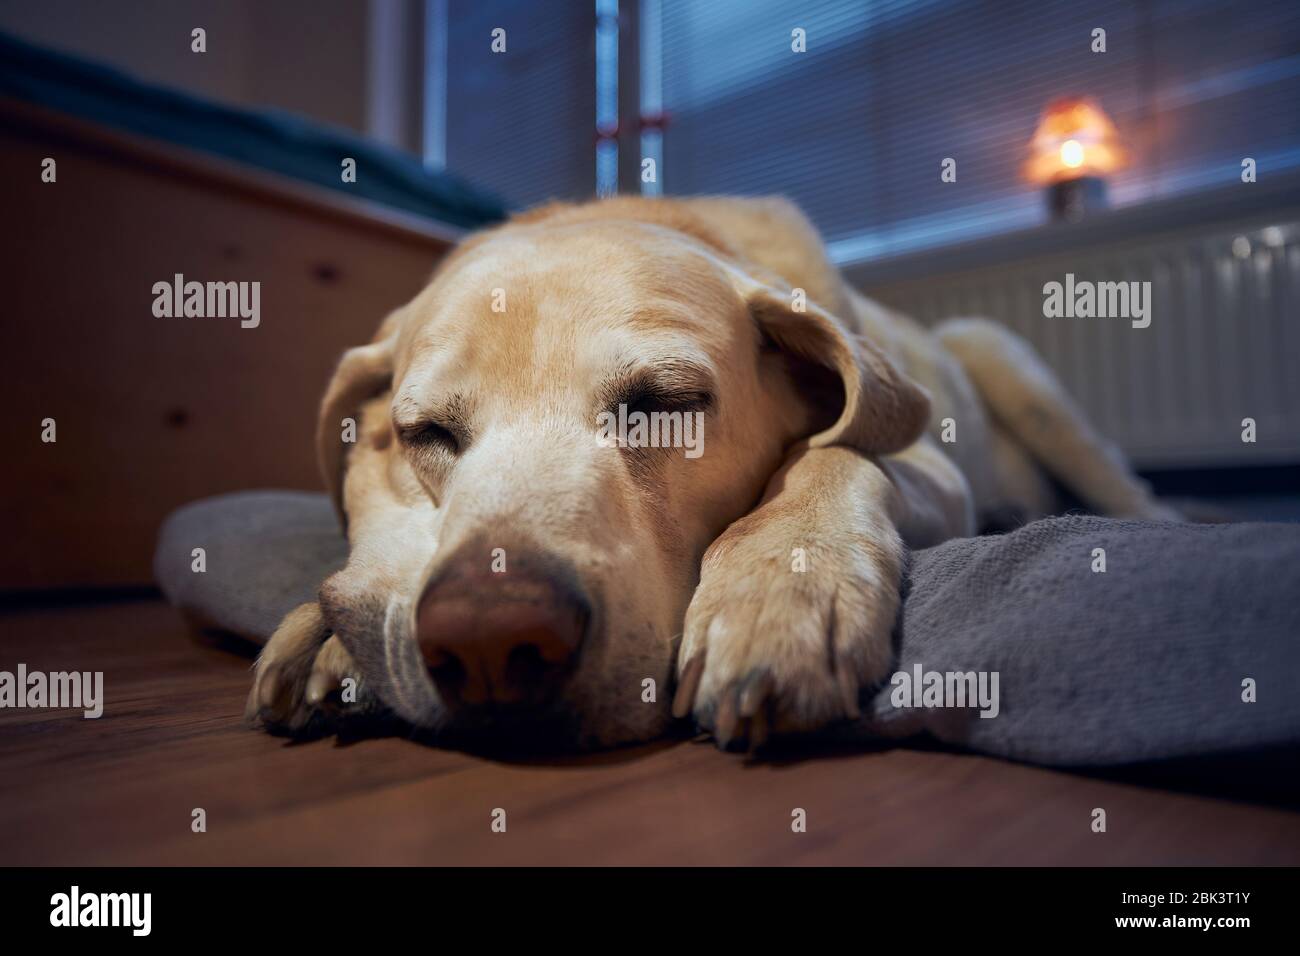 Old dog (labrador retriever) sleeping on his pet bed under window at home. Stock Photo